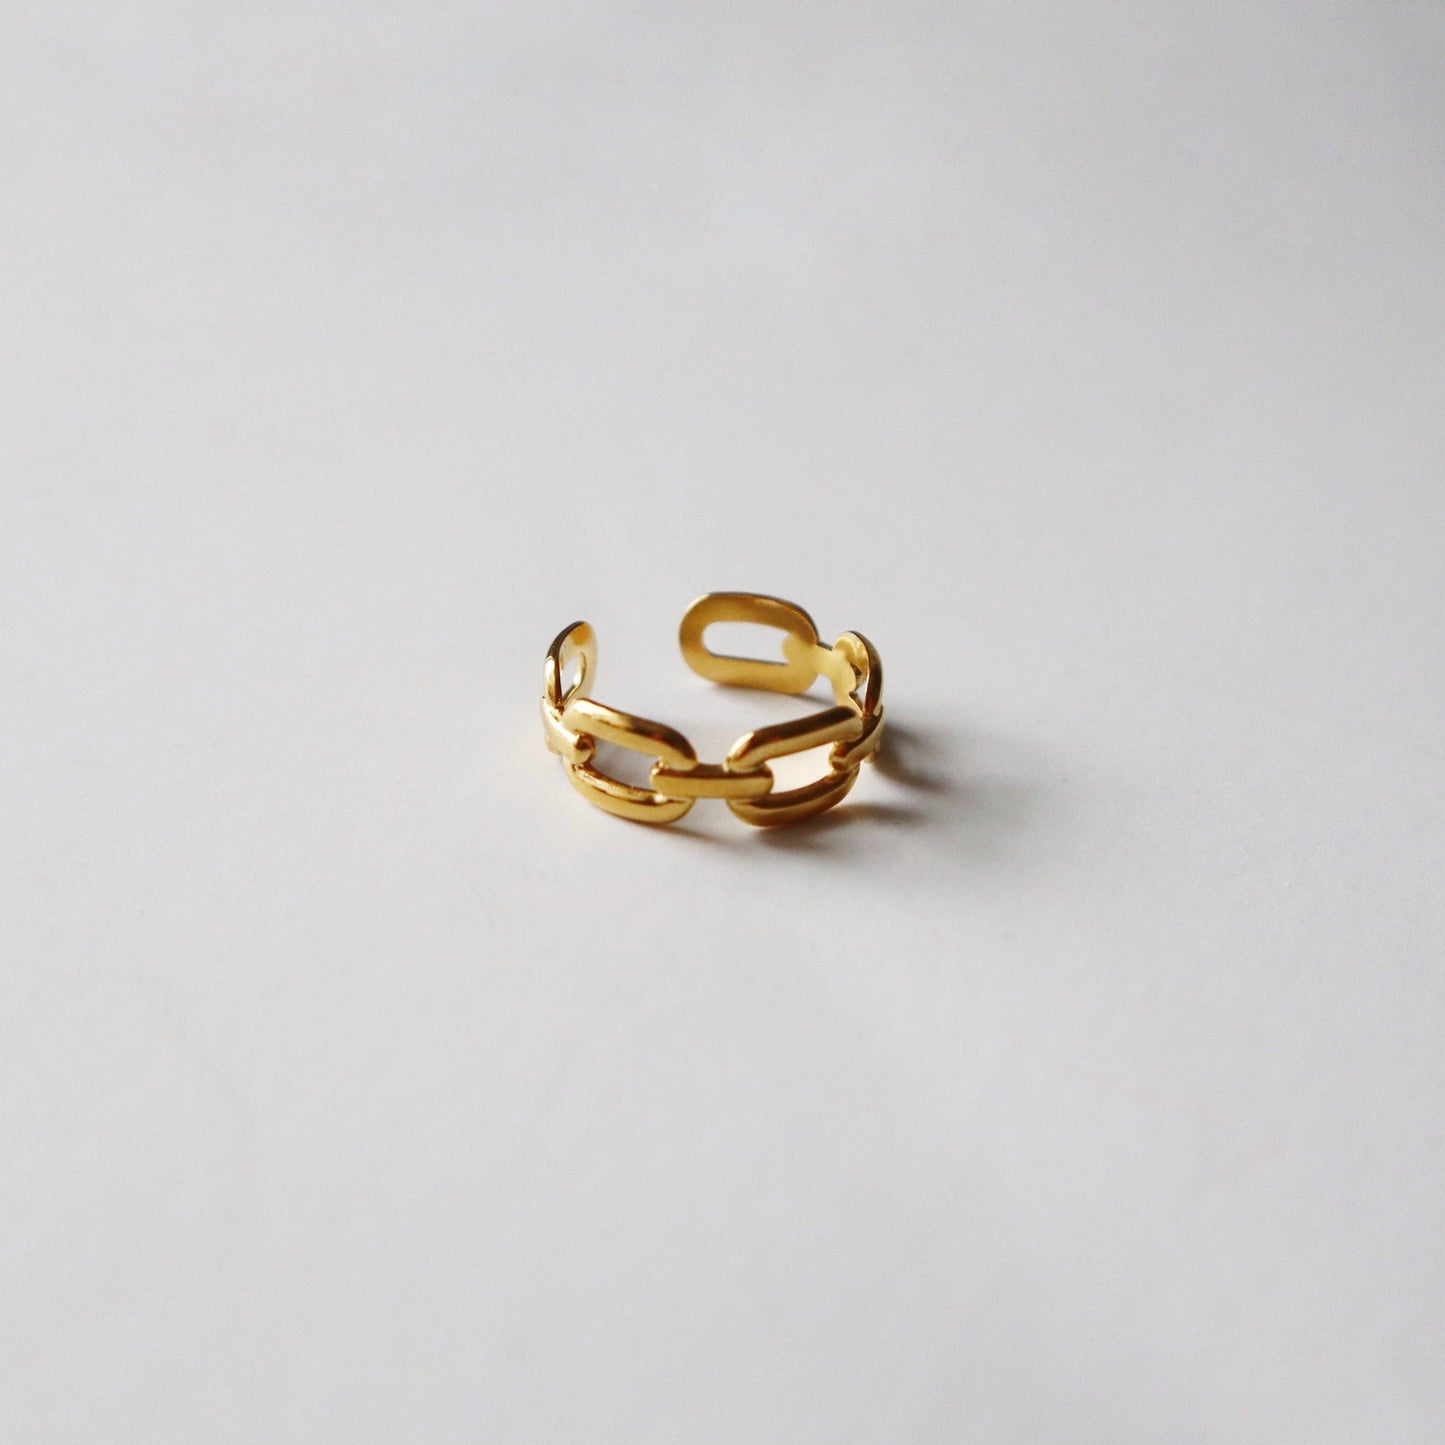 Chain Link Ring | Adjustable Ring - JESSA JEWELRY | GOLD JEWELRY; dainty, affordable gold everyday jewelry. Tarnish free, water-resistant, hypoallergenic. Jewelry for everyday wear